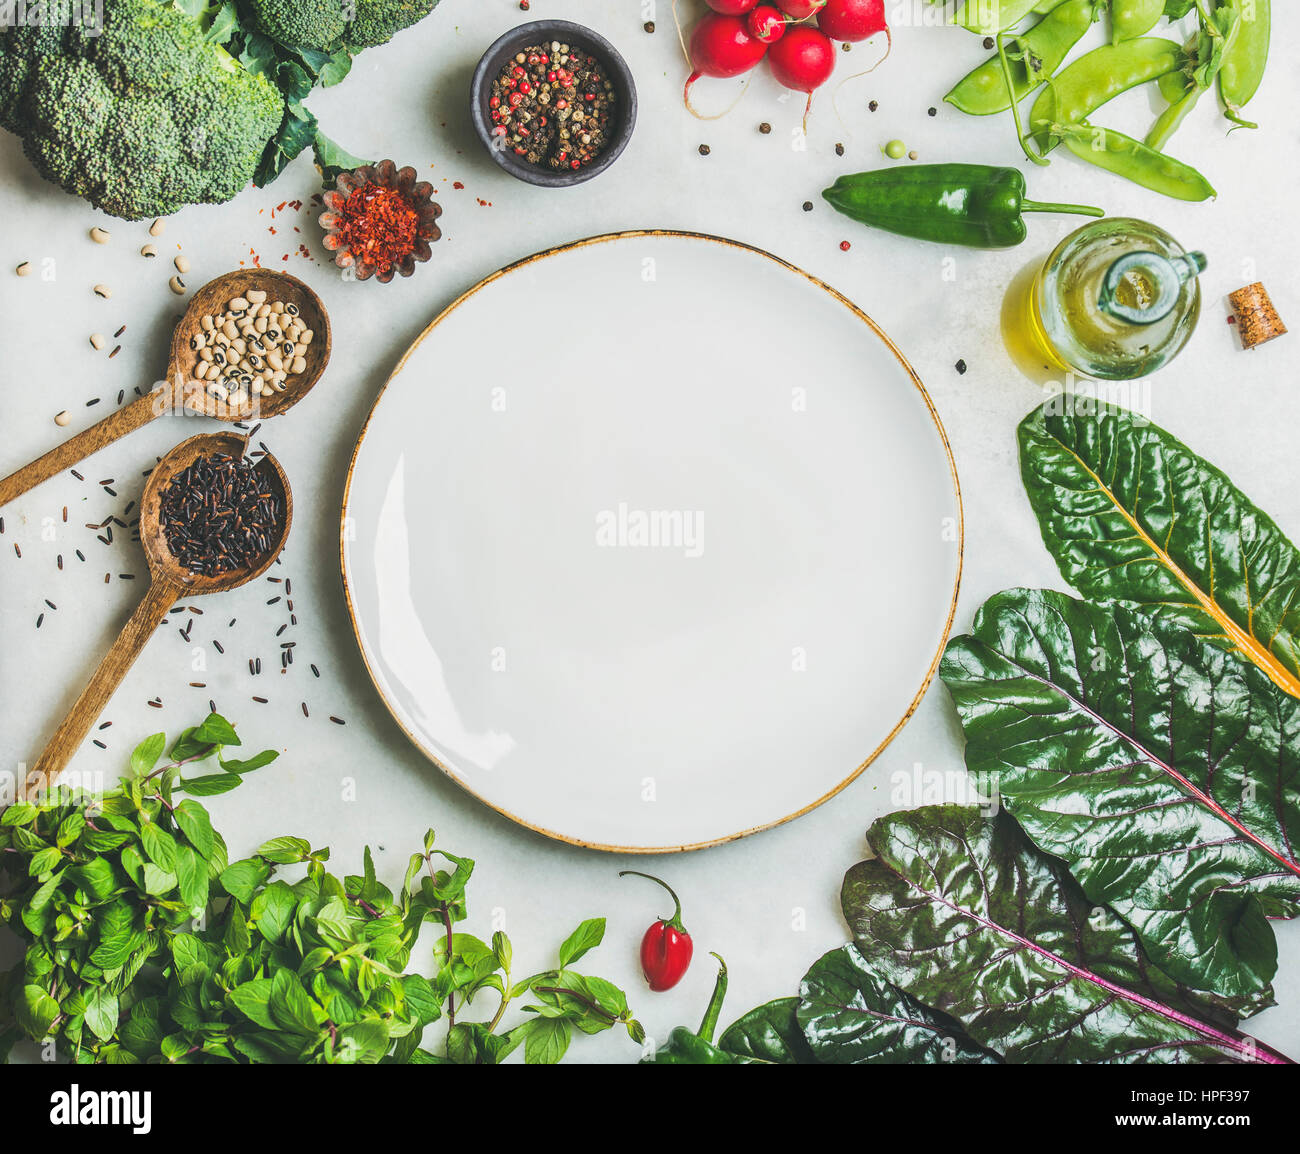 Fresh raw greens, vegetables and grains over light grey marble kitchen countertop, wtite ceramic plate in center, top view, copy space. Healthy, clean Stock Photo